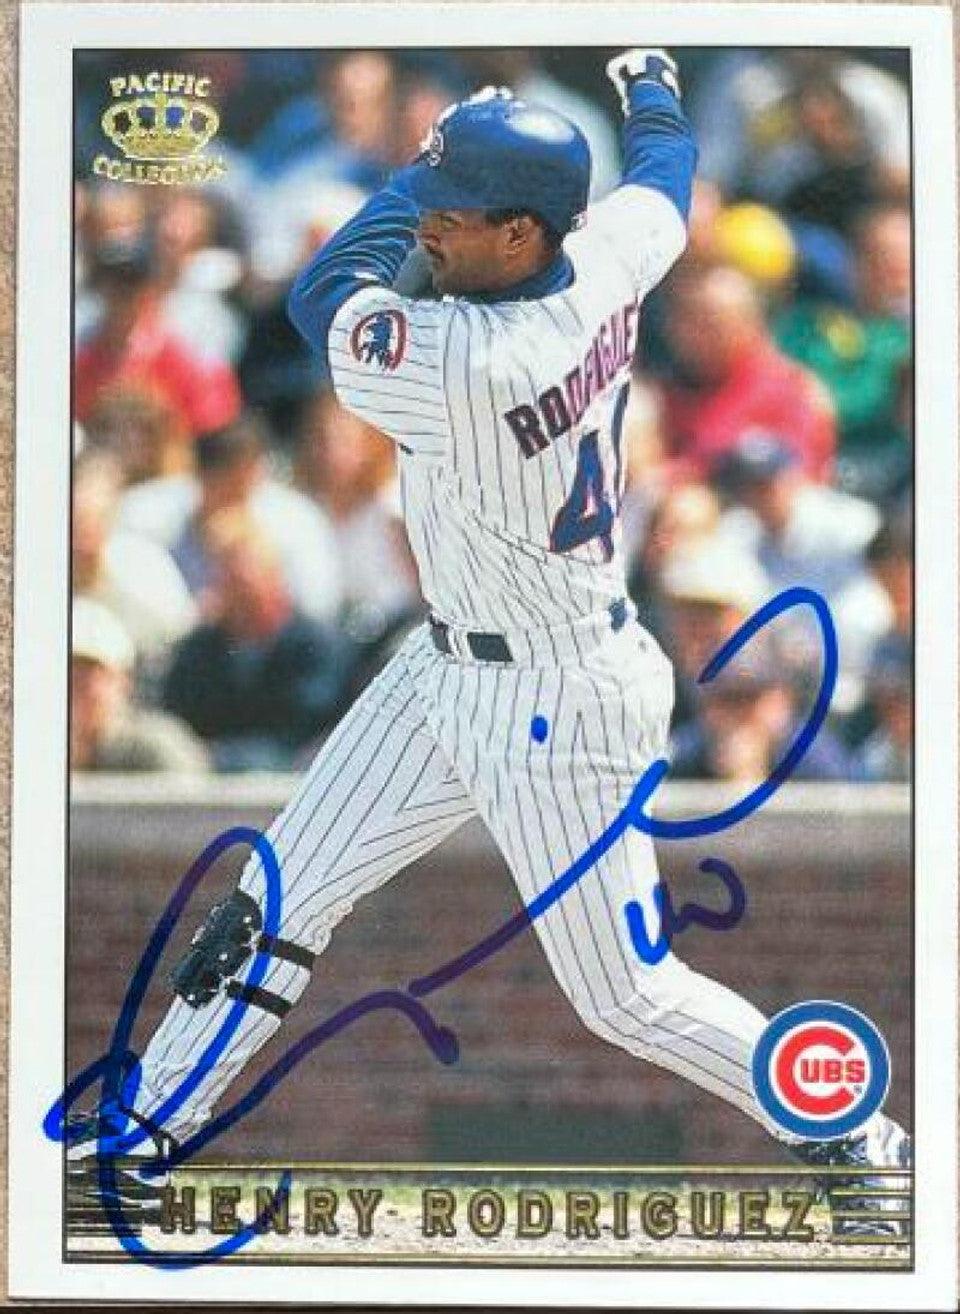 Henry Rodriguez Signed 1999 Pacific Crown Collection Baseball Card - Chicago Cubs - PastPros